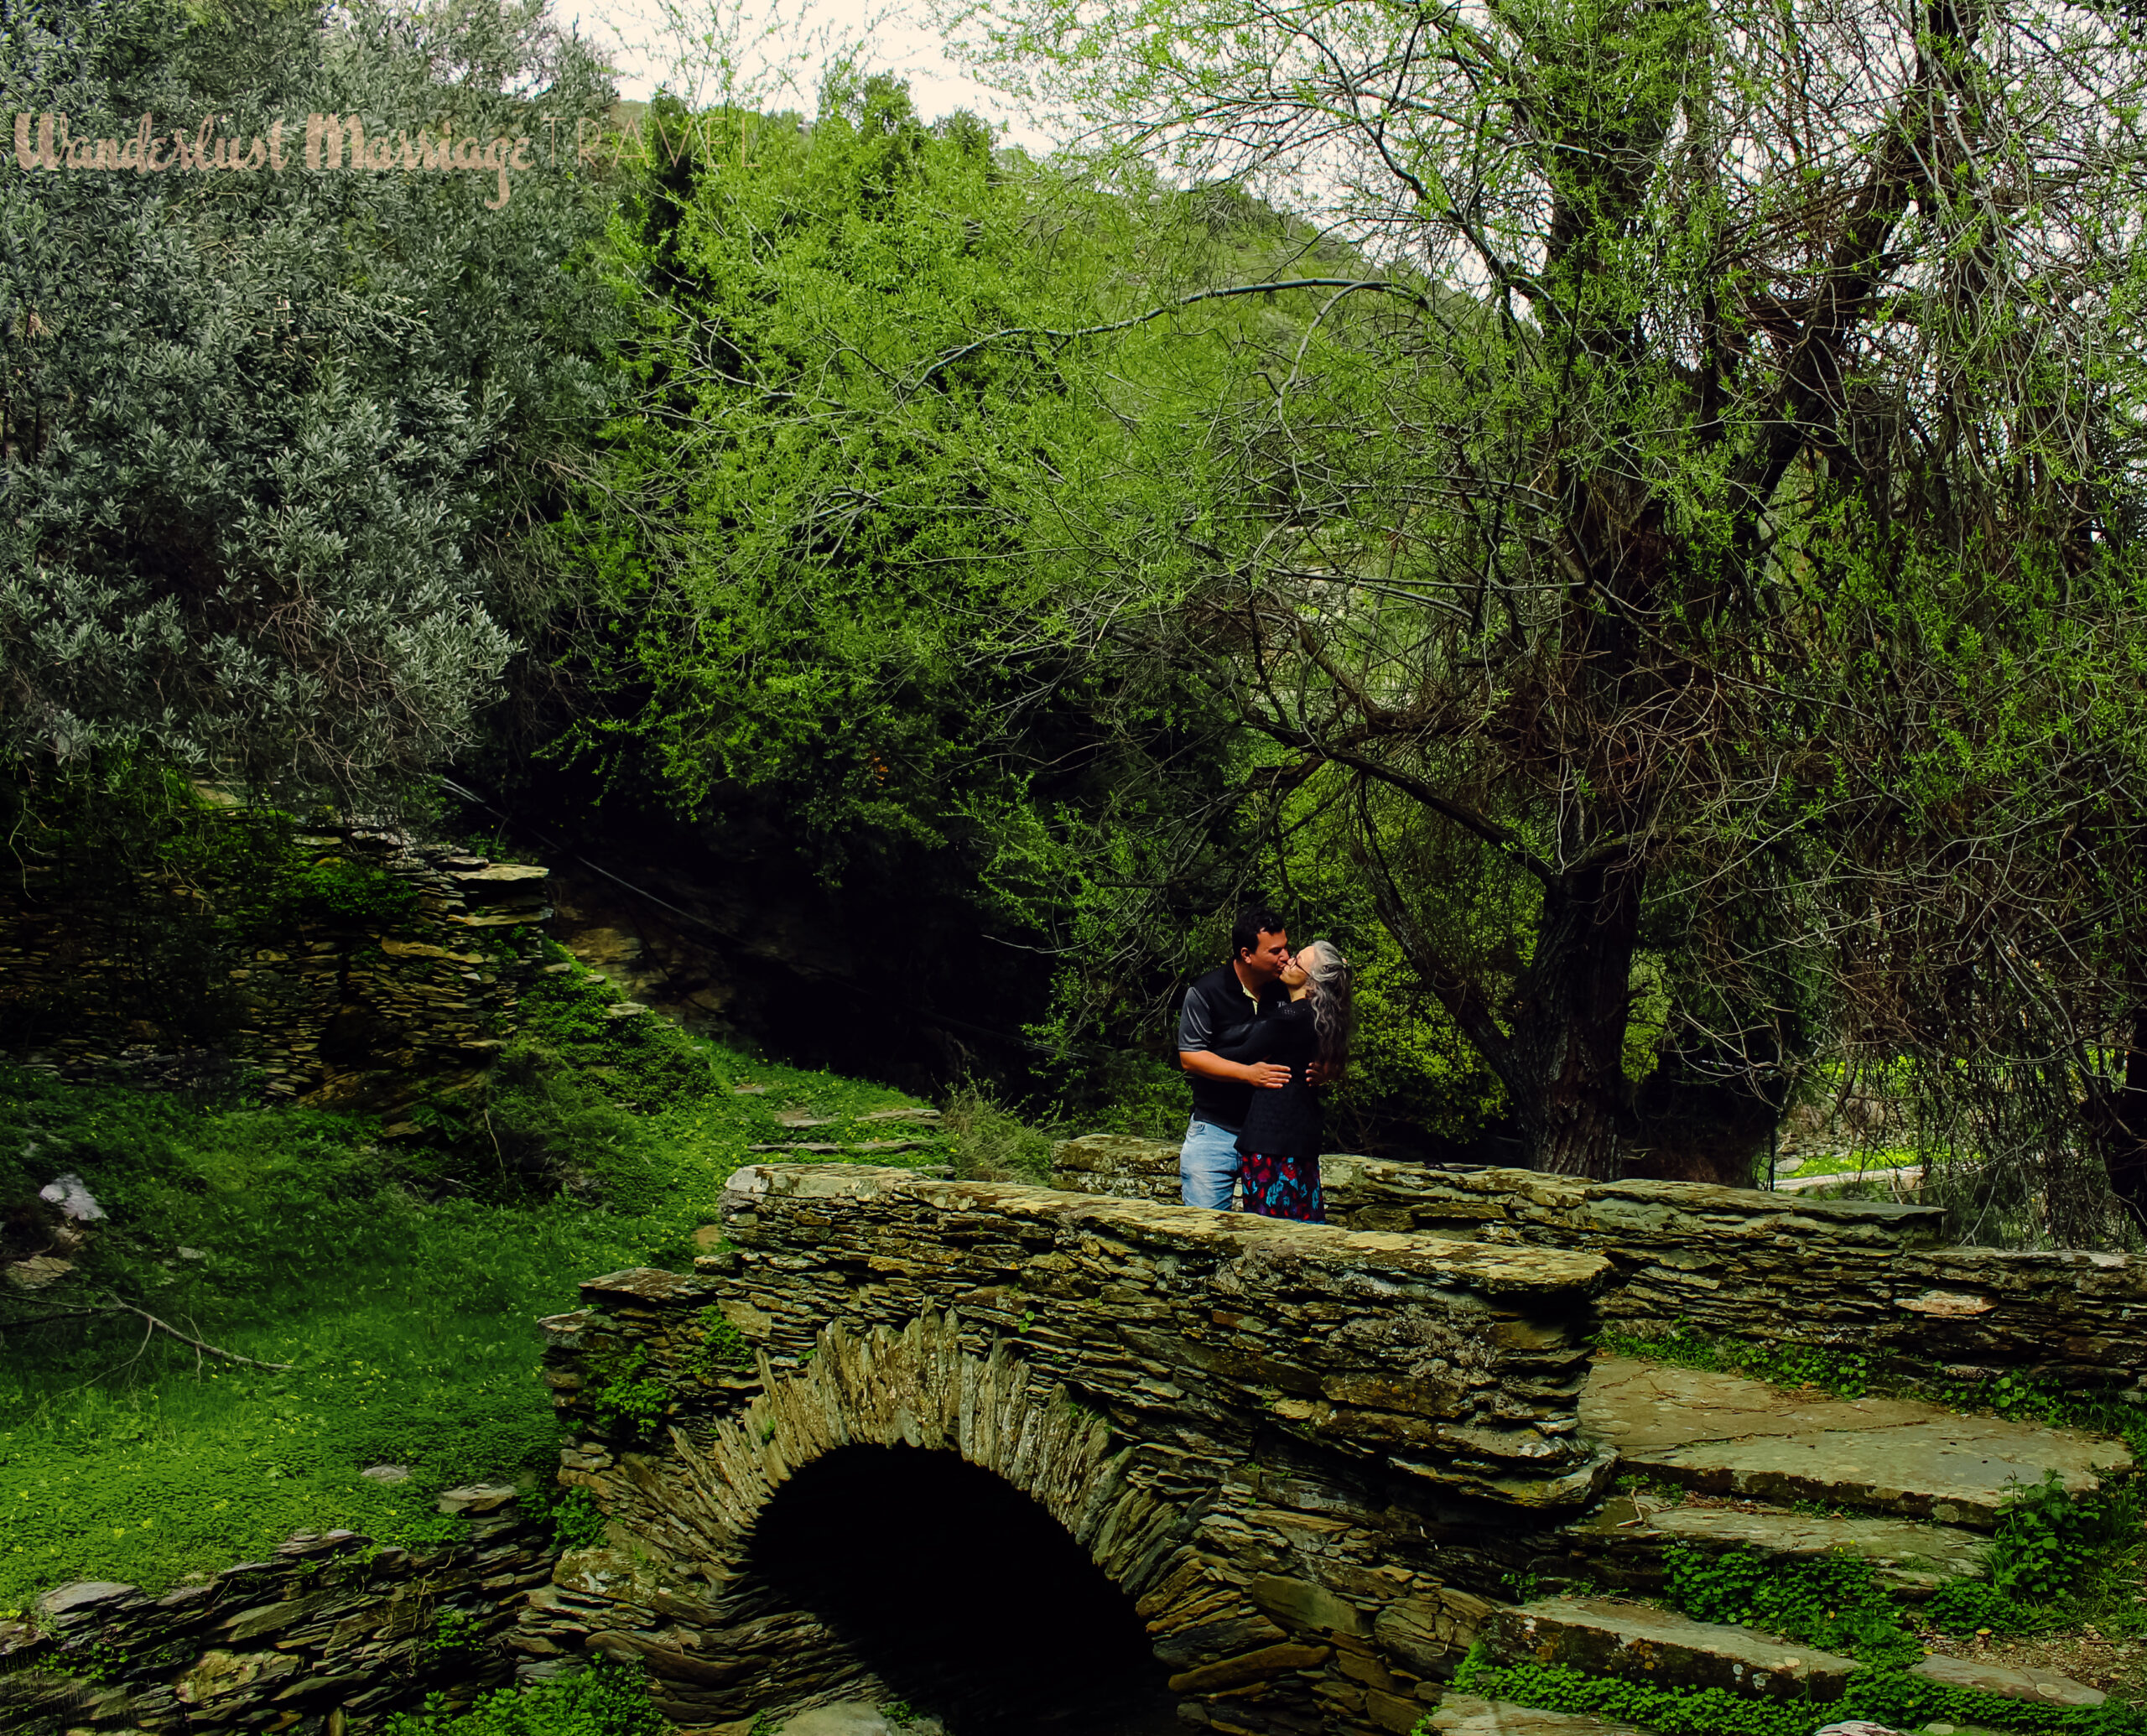 Stone bridge nestled in lush green scenery and a man and a lady kiss while standing on the stone bridge